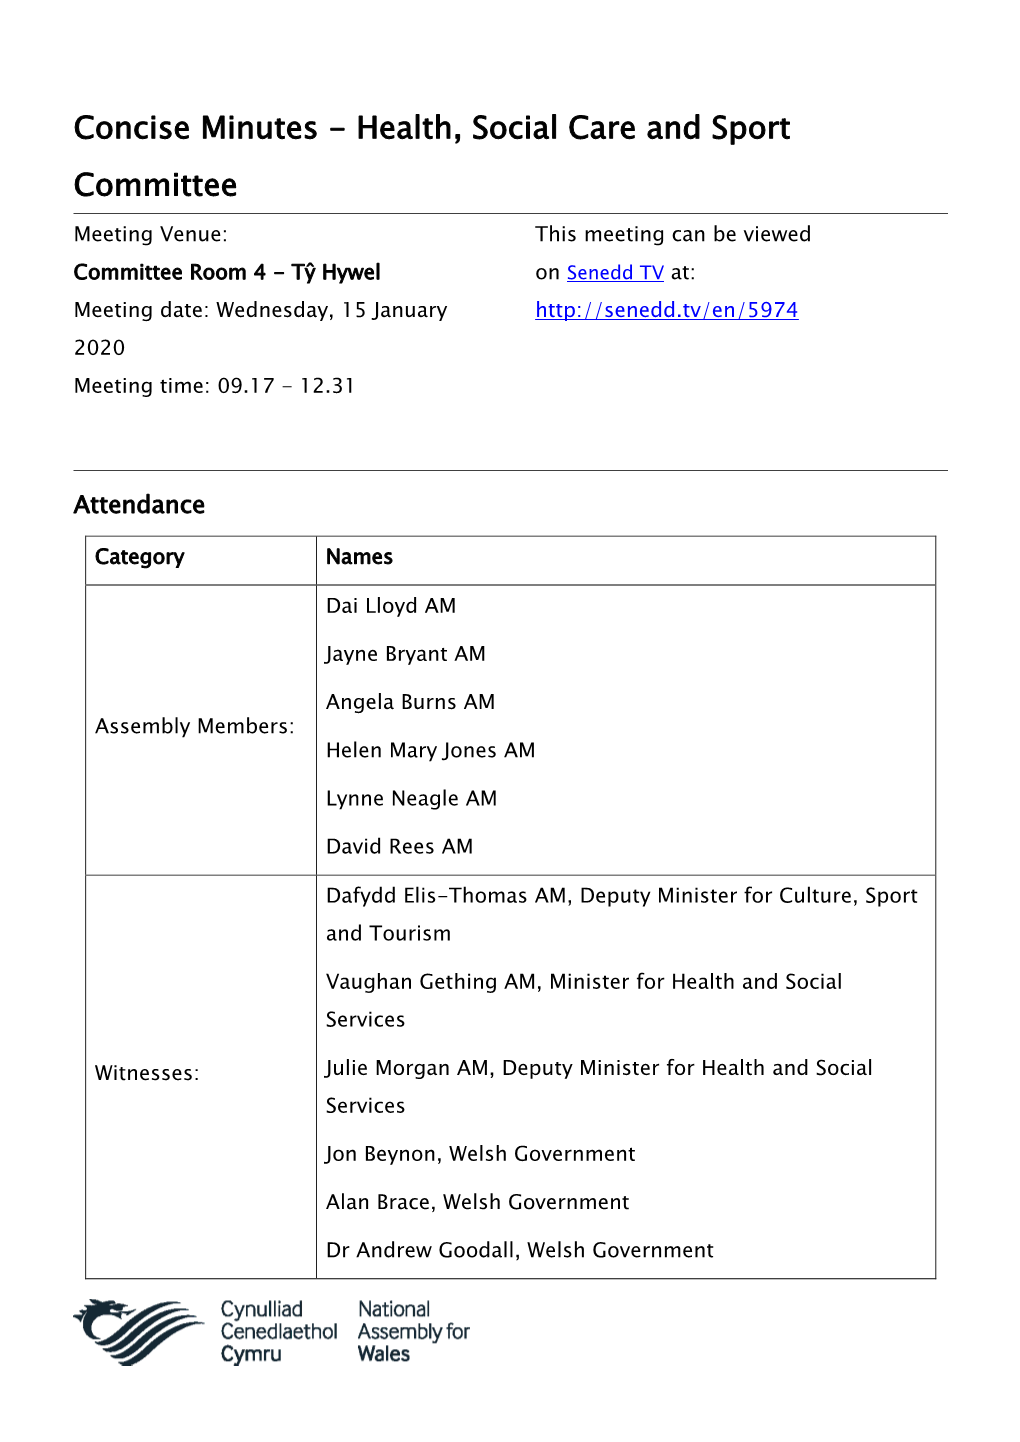 Concise Minutes - Health, Social Care and Sport Committee